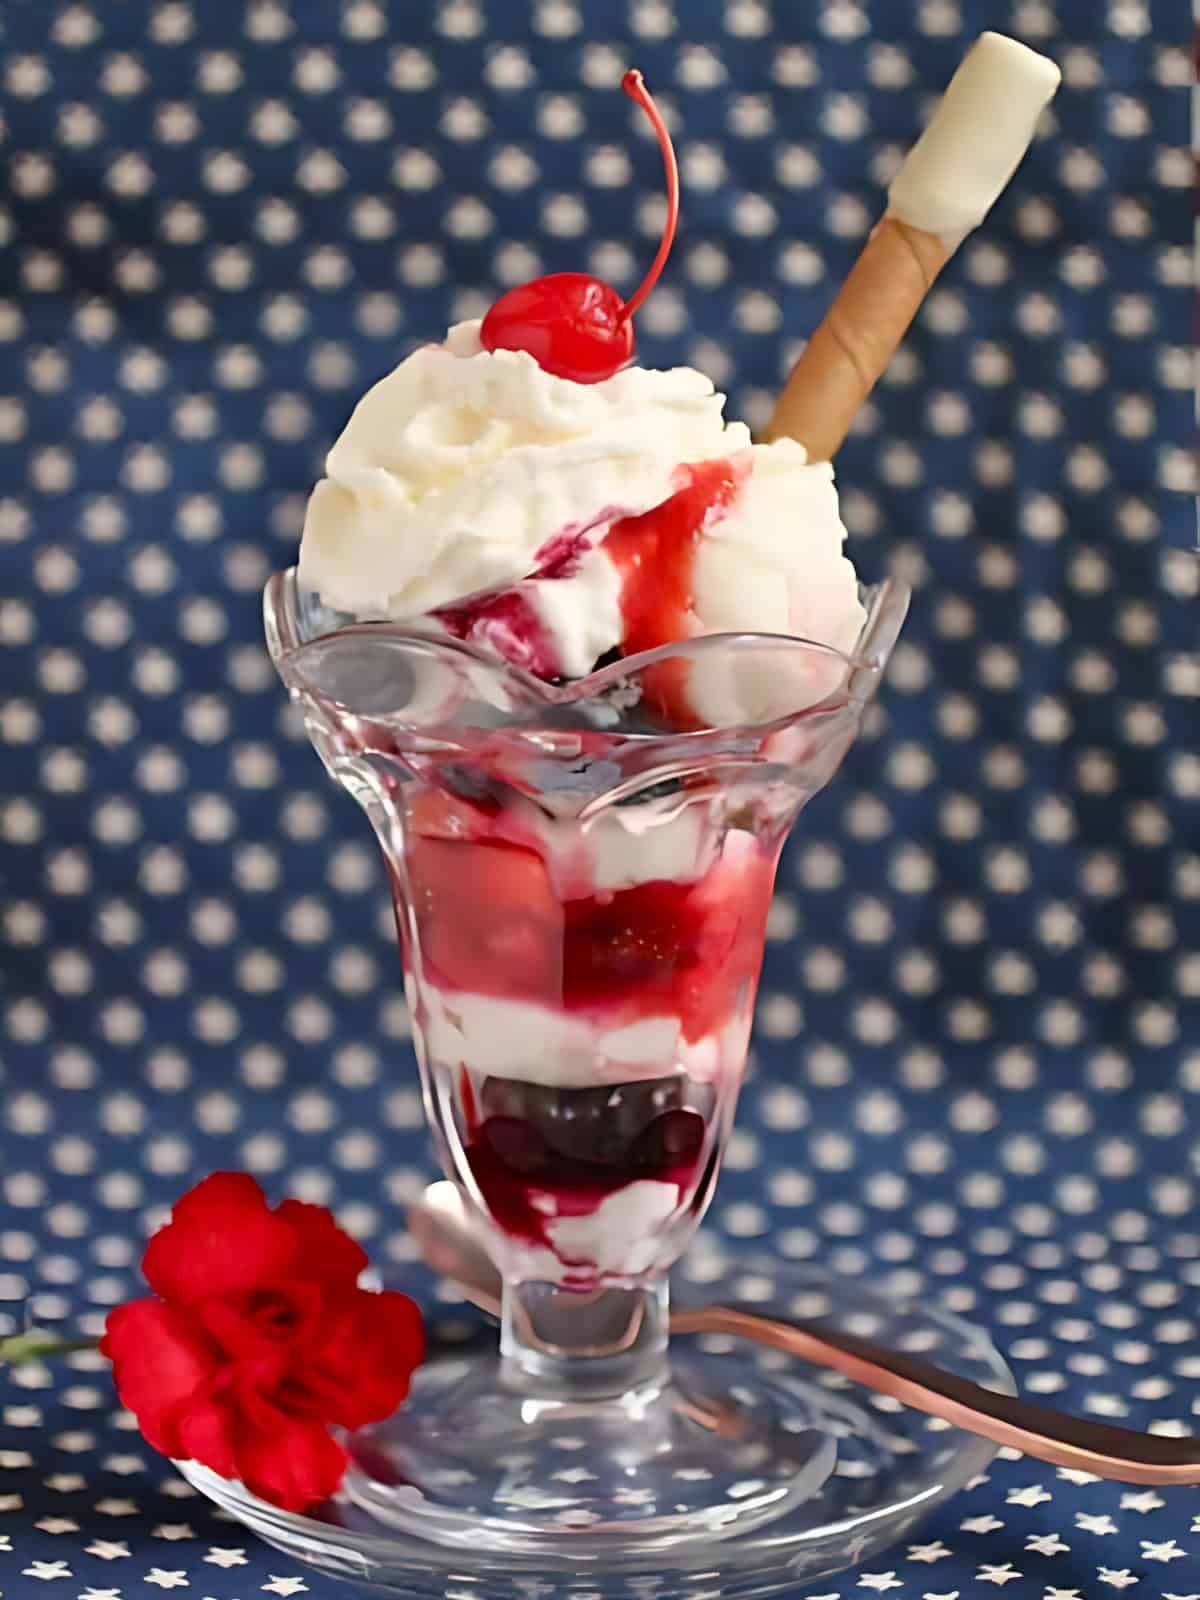 Knickerbocker with a cherry on top.